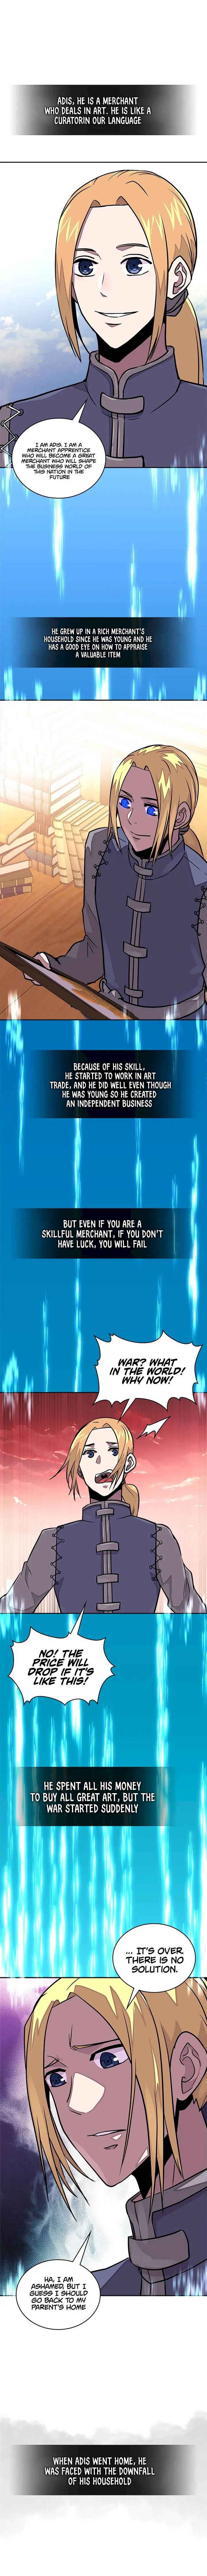 Dimensional Mercenary ( Other World Warrior ) - Chapter 104 Page 14